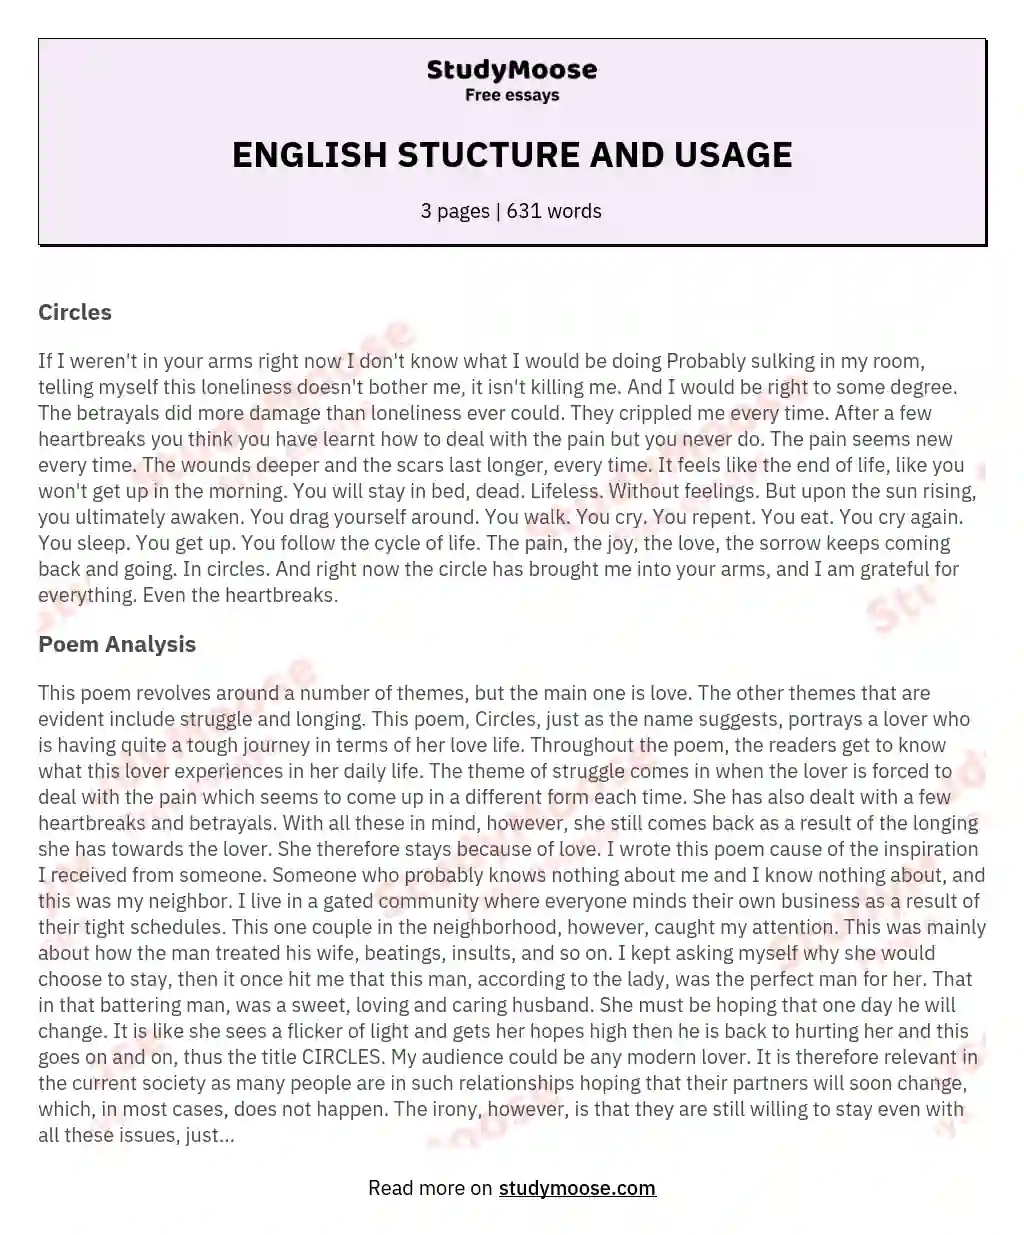 ENGLISH STUCTURE AND USAGE essay